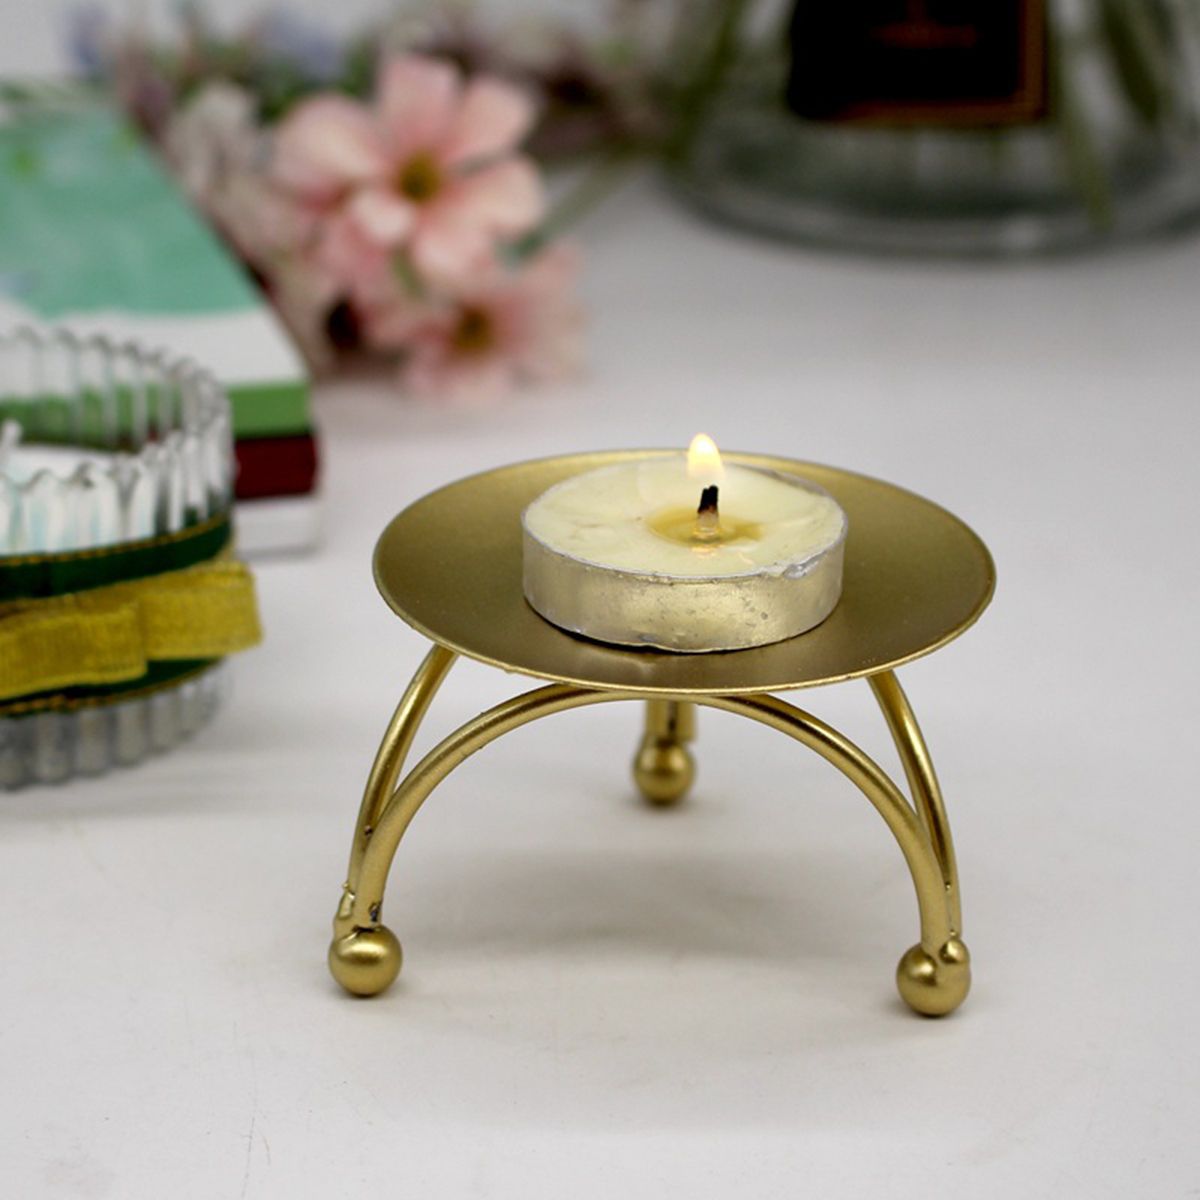 Iron-Candle-Holder-Round-Table-Golden-Candlestick-for-Wedding-Ornament-Party-1493153